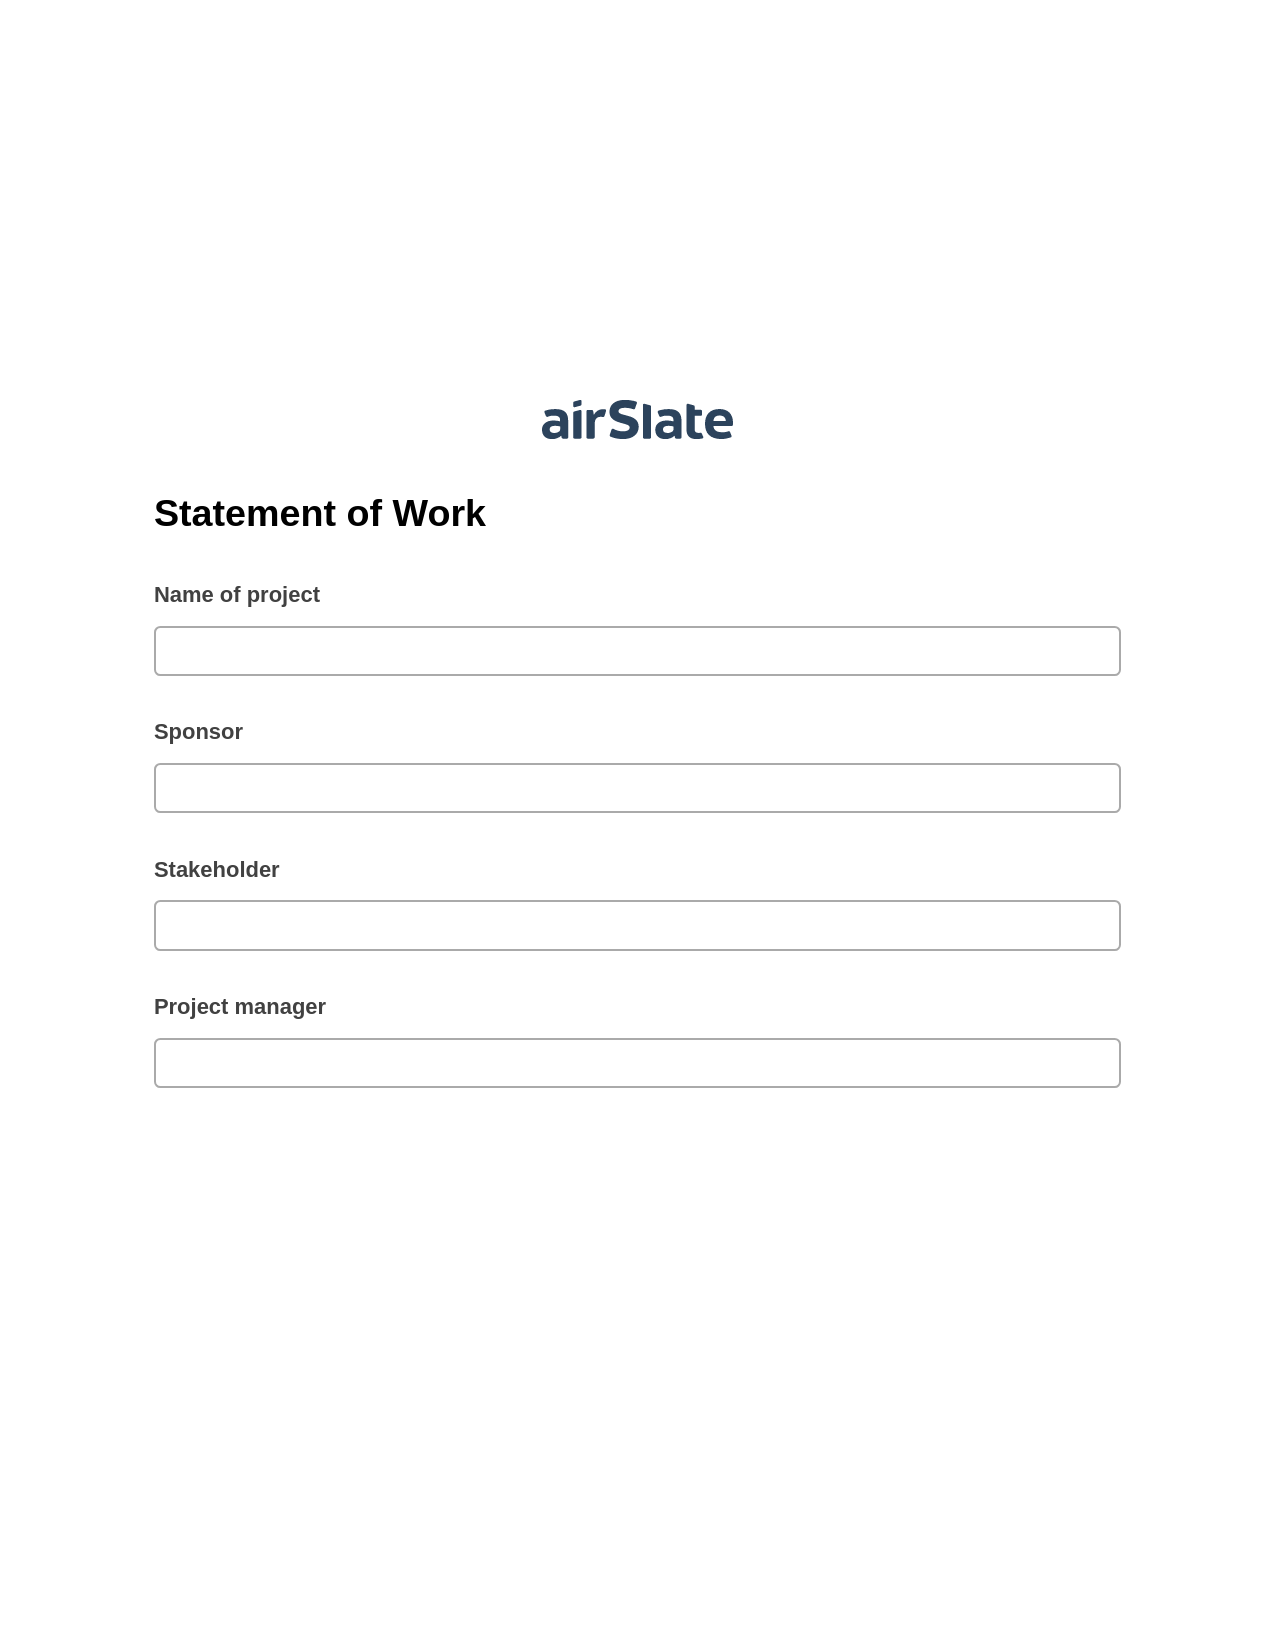 Statement of Work Pre-fill Document Bot, Roles Reminder Bot, Export to MySQL Bot